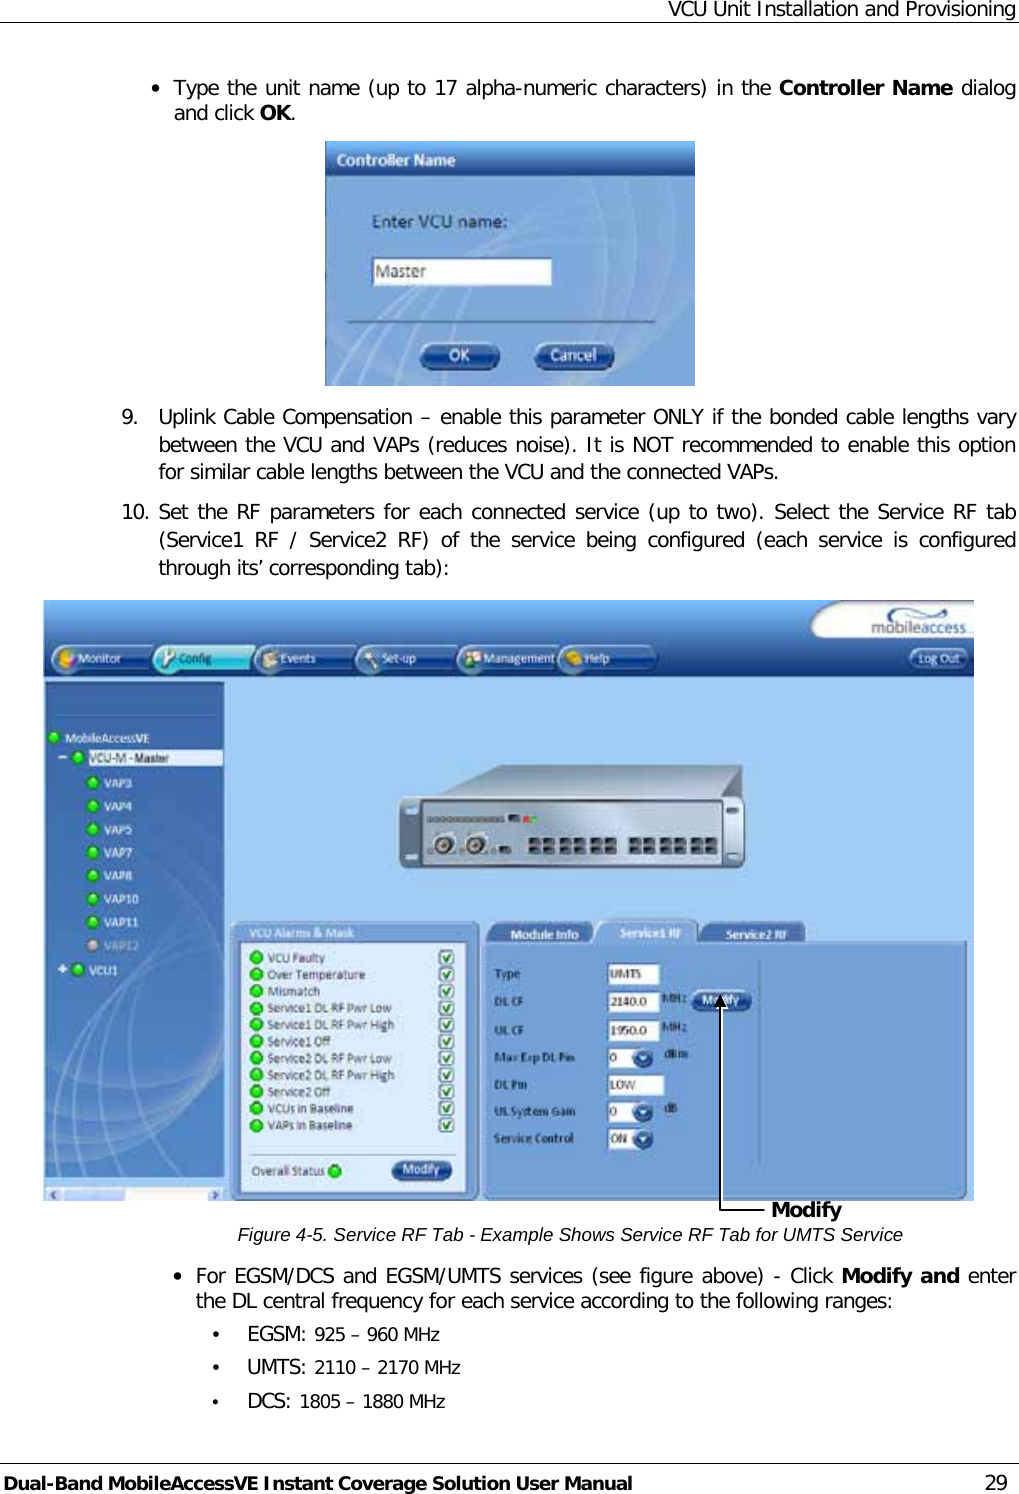 VCU Unit Installation and Provisioning Dual-Band MobileAccessVE Instant Coverage Solution User Manual 29 · Type the unit name (up to 17 alpha-numeric characters) in the Controller Name dialog and click OK.  9.  Uplink Cable Compensation – enable this parameter ONLY if the bonded cable lengths vary between the VCU and VAPs (reduces noise). It is NOT recommended to enable this option for similar cable lengths between the VCU and the connected VAPs. 10. Set the RF parameters for each connected service (up to two). Select the Service RF tab (Service1 RF / Service2 RF) of the service being configured (each service is configured through its’ corresponding tab):   Figure  4-5. Service RF Tab - Example Shows Service RF Tab for UMTS Service · For EGSM/DCS and EGSM/UMTS services (see figure above) - Click Modify and enter the DL central frequency for each service according to the following ranges: • EGSM: 925 – 960 MHz • UMTS: 2110 – 2170 MHz • DCS: 1805 – 1880 MHz Modify  